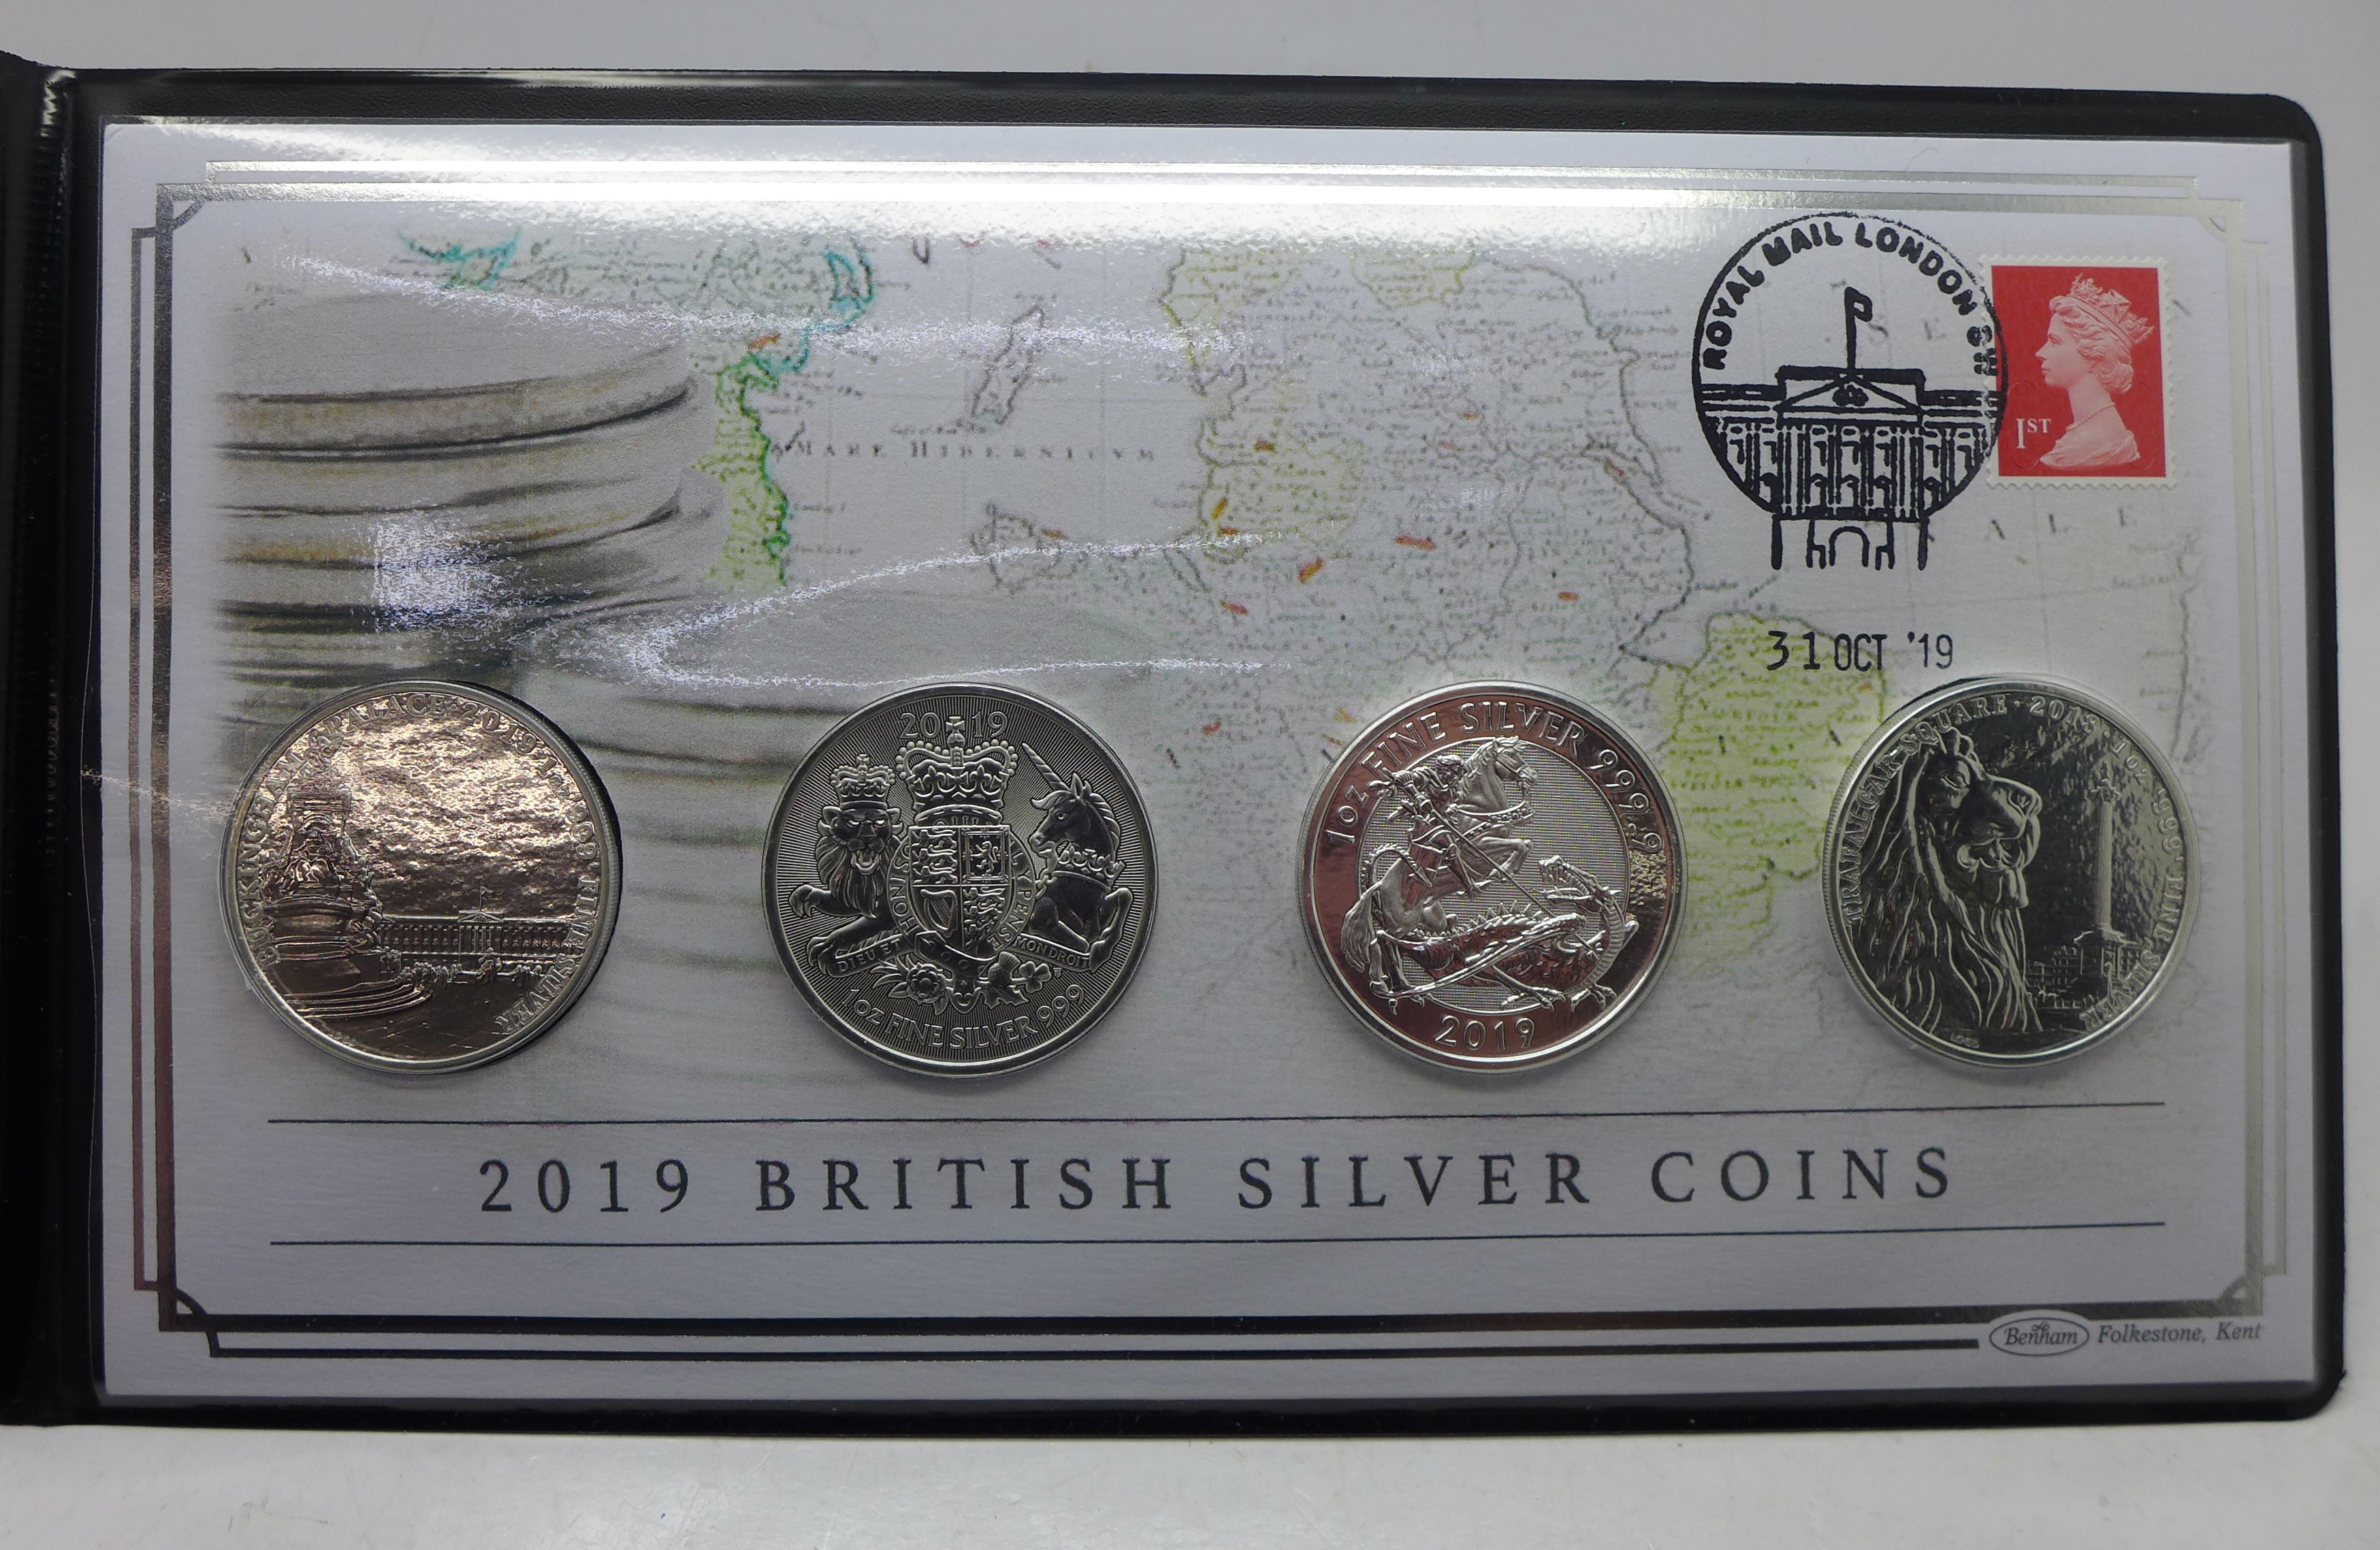 A 2019 British silver coins cover collection includes four 1oz. fine 999.9 silver coins, with